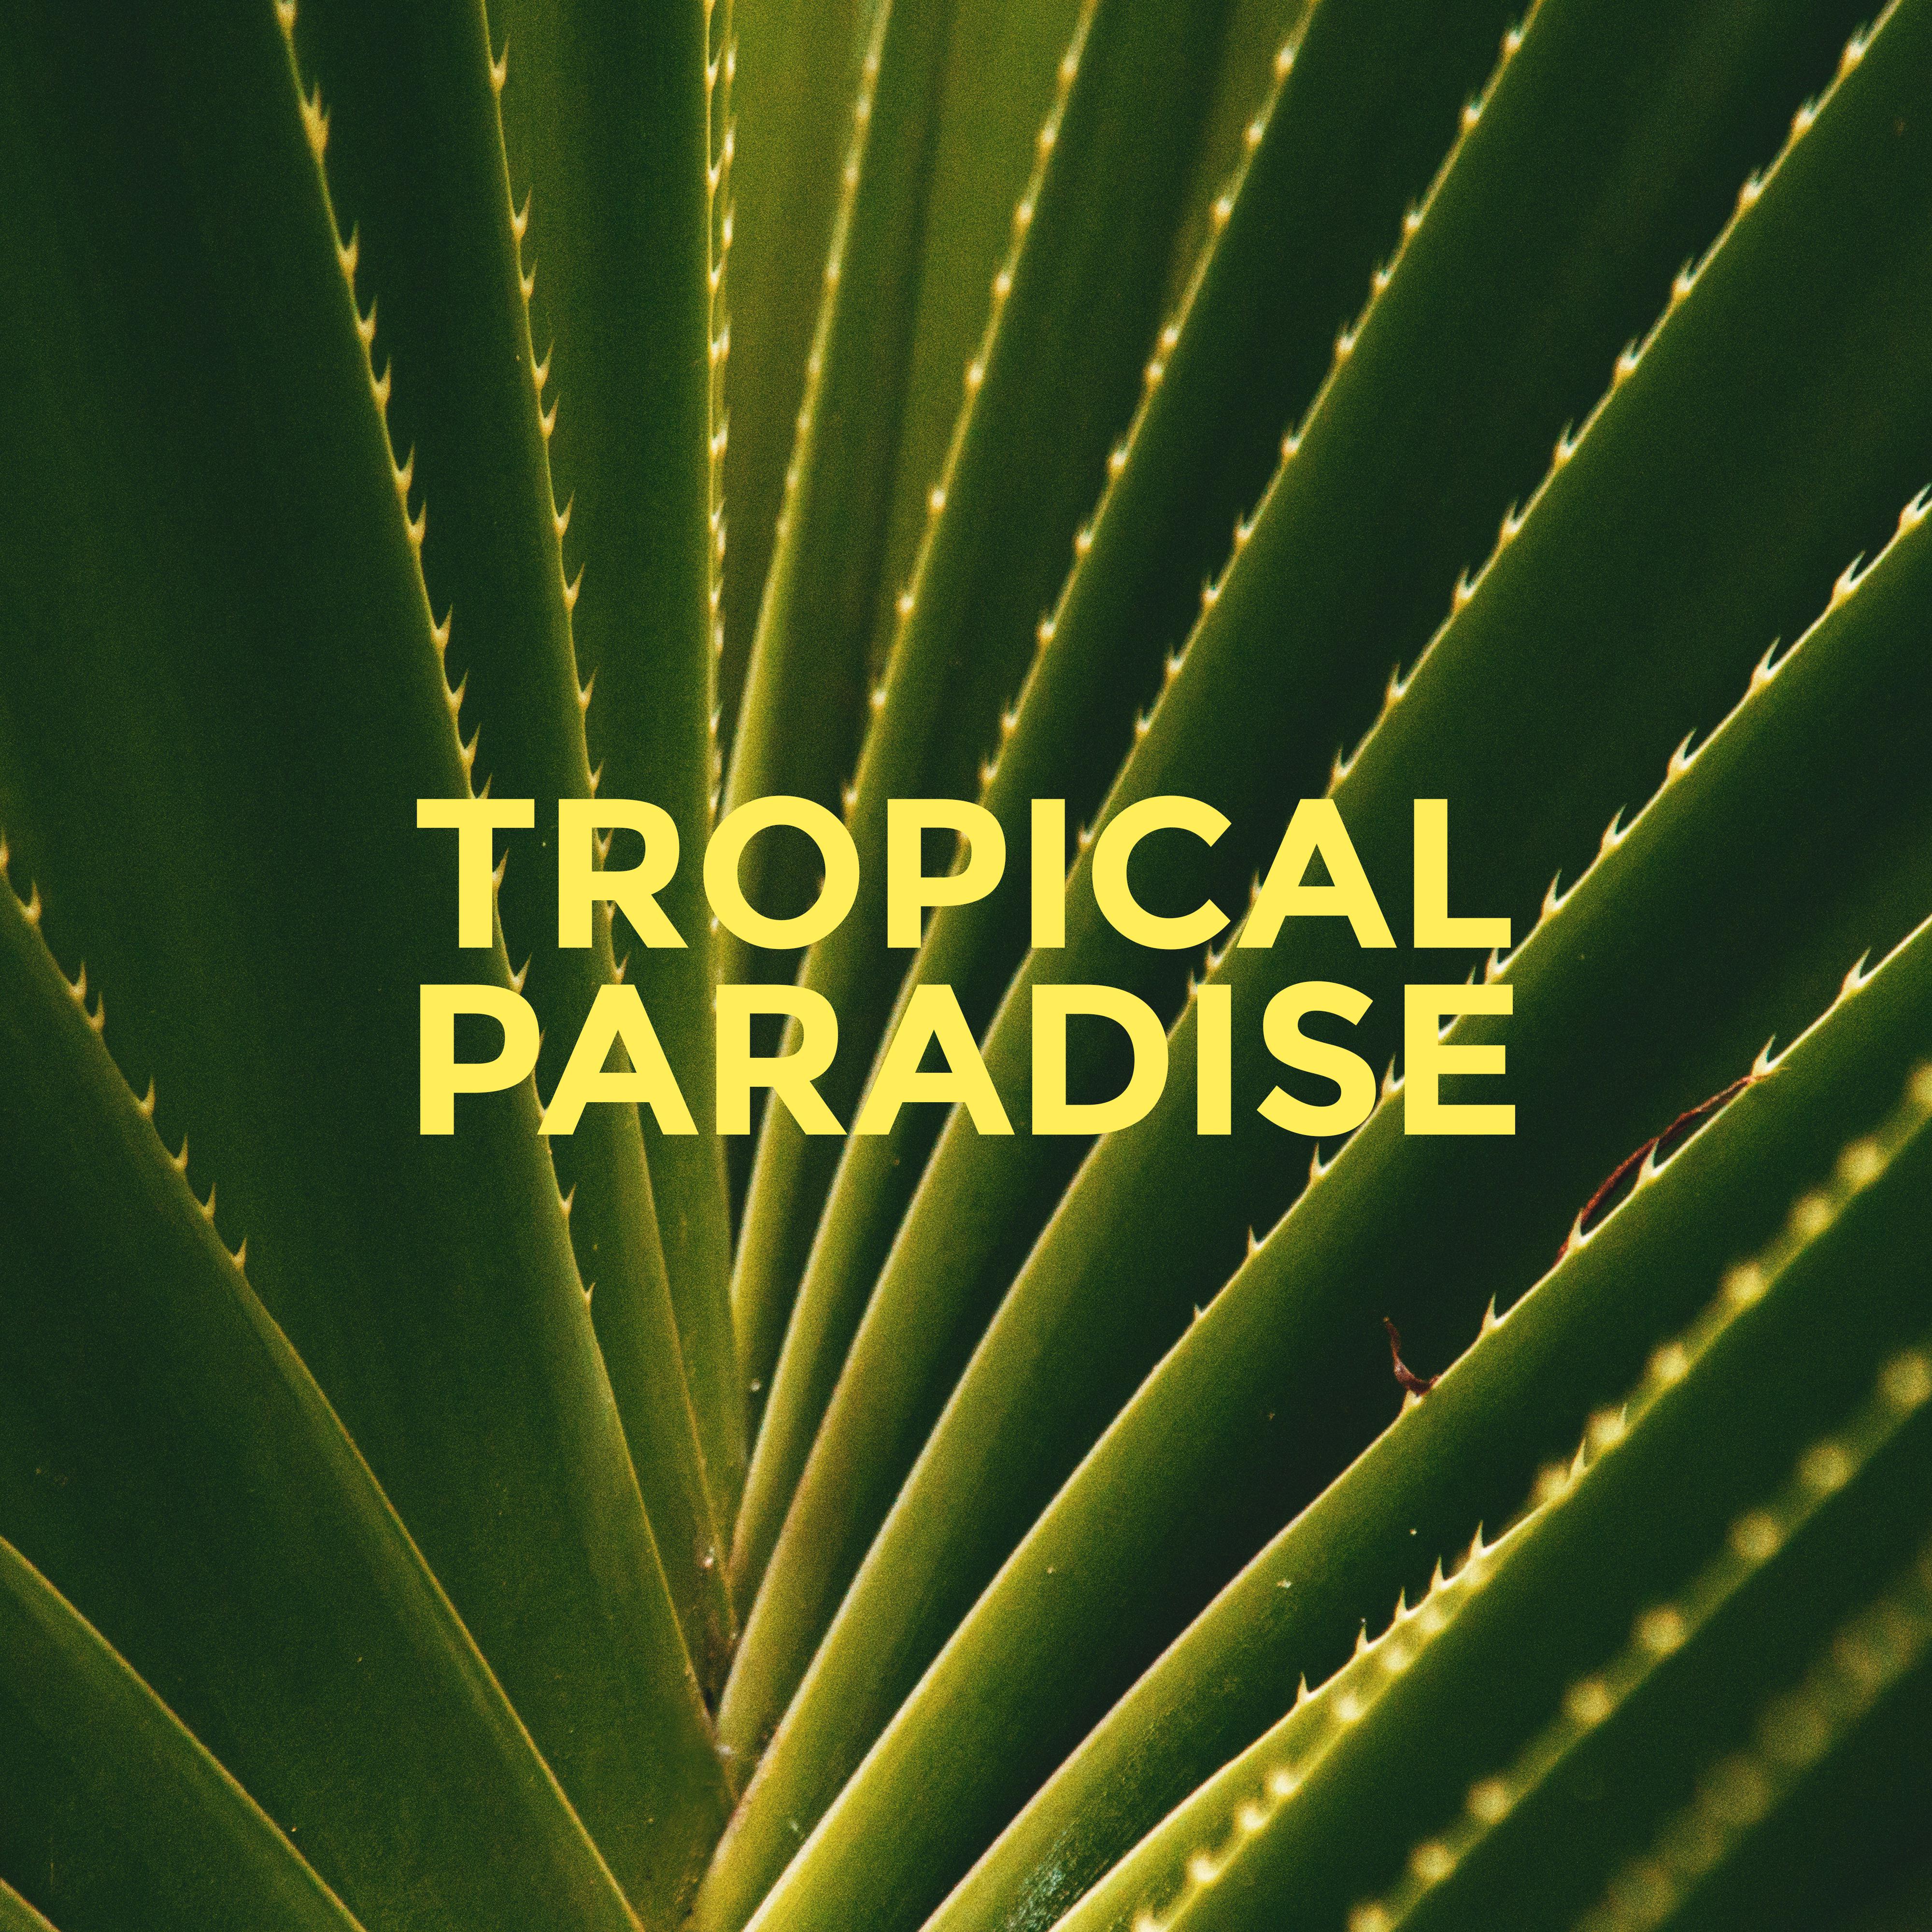 Tropical Paradise  Summer Music 2019, Fresh Relaxing Chill, Lounge Music, Peaceful Chillout Melodies, Deep Vibes, Beach Music